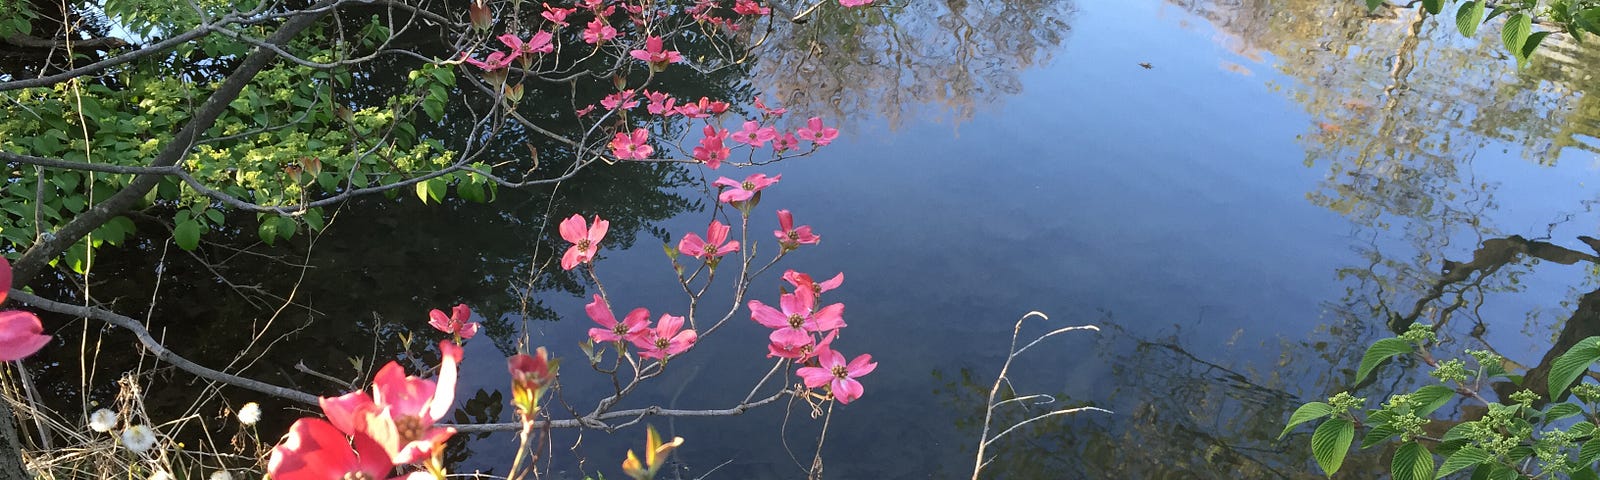 Pink dogwood blossoms in full bloom over a pond in which trees are reflected